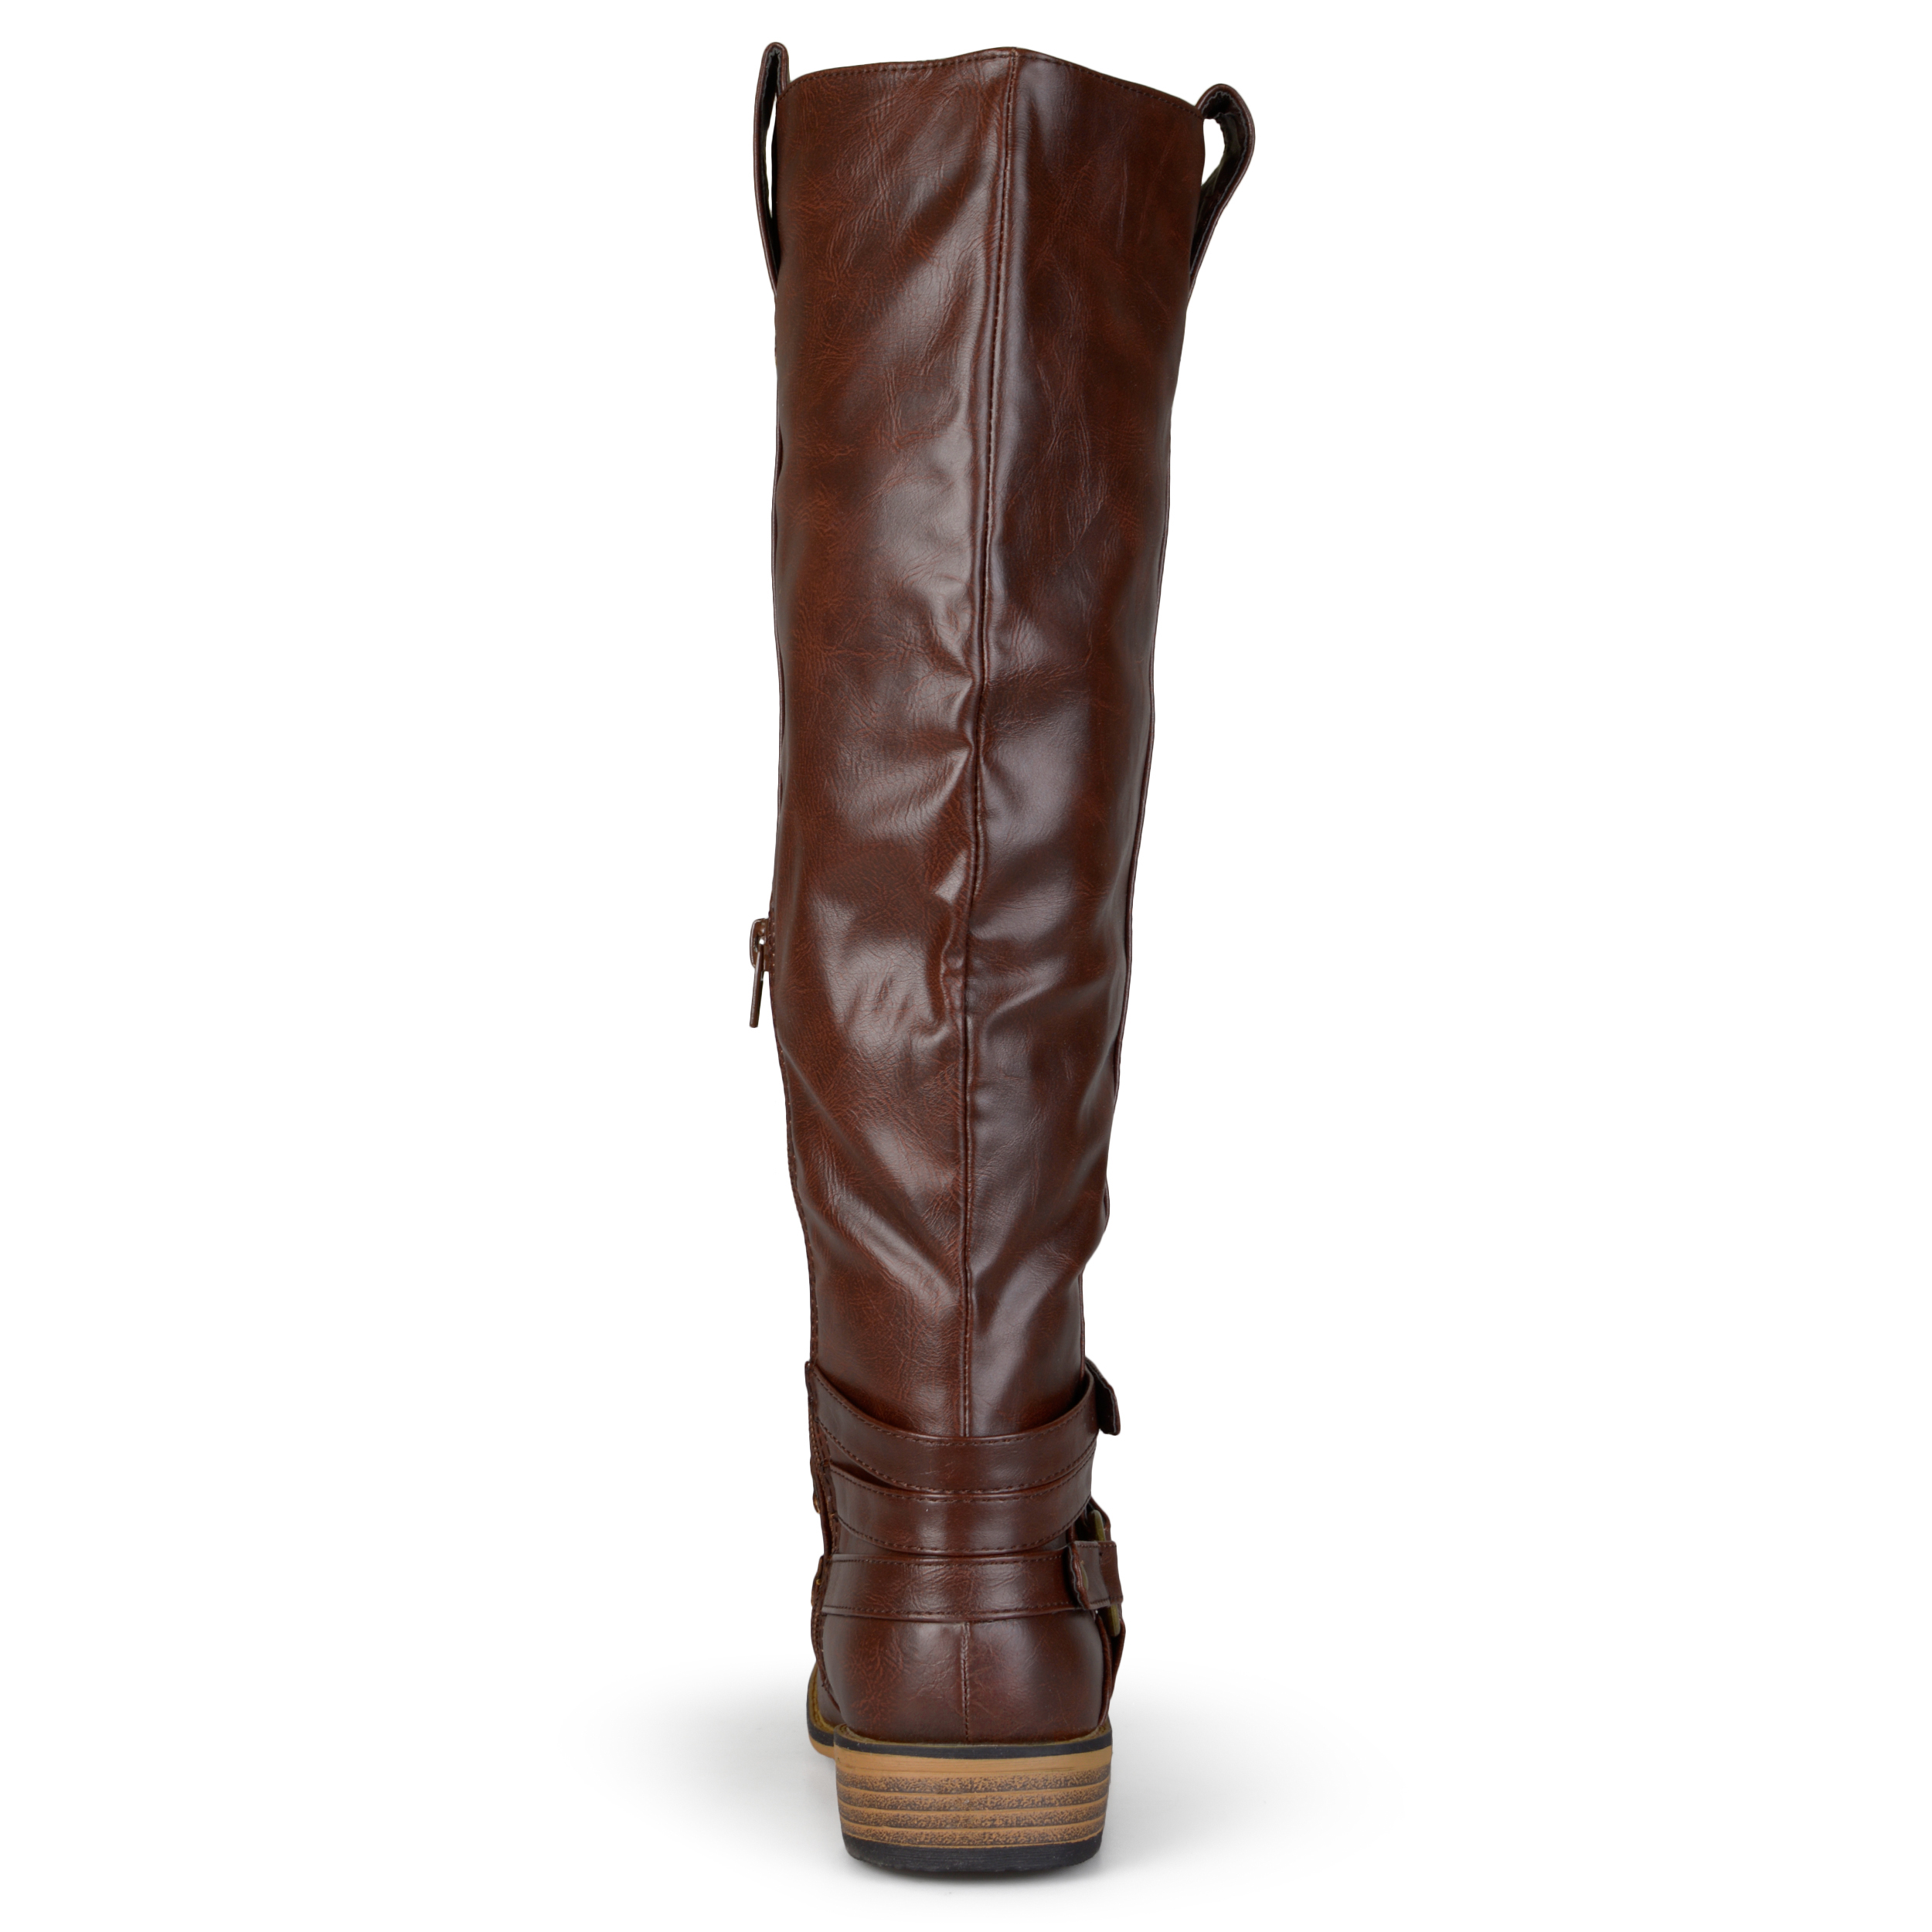 Brinely Co. Women's Mid-calf Wide Calf Riding Boots - image 4 of 9